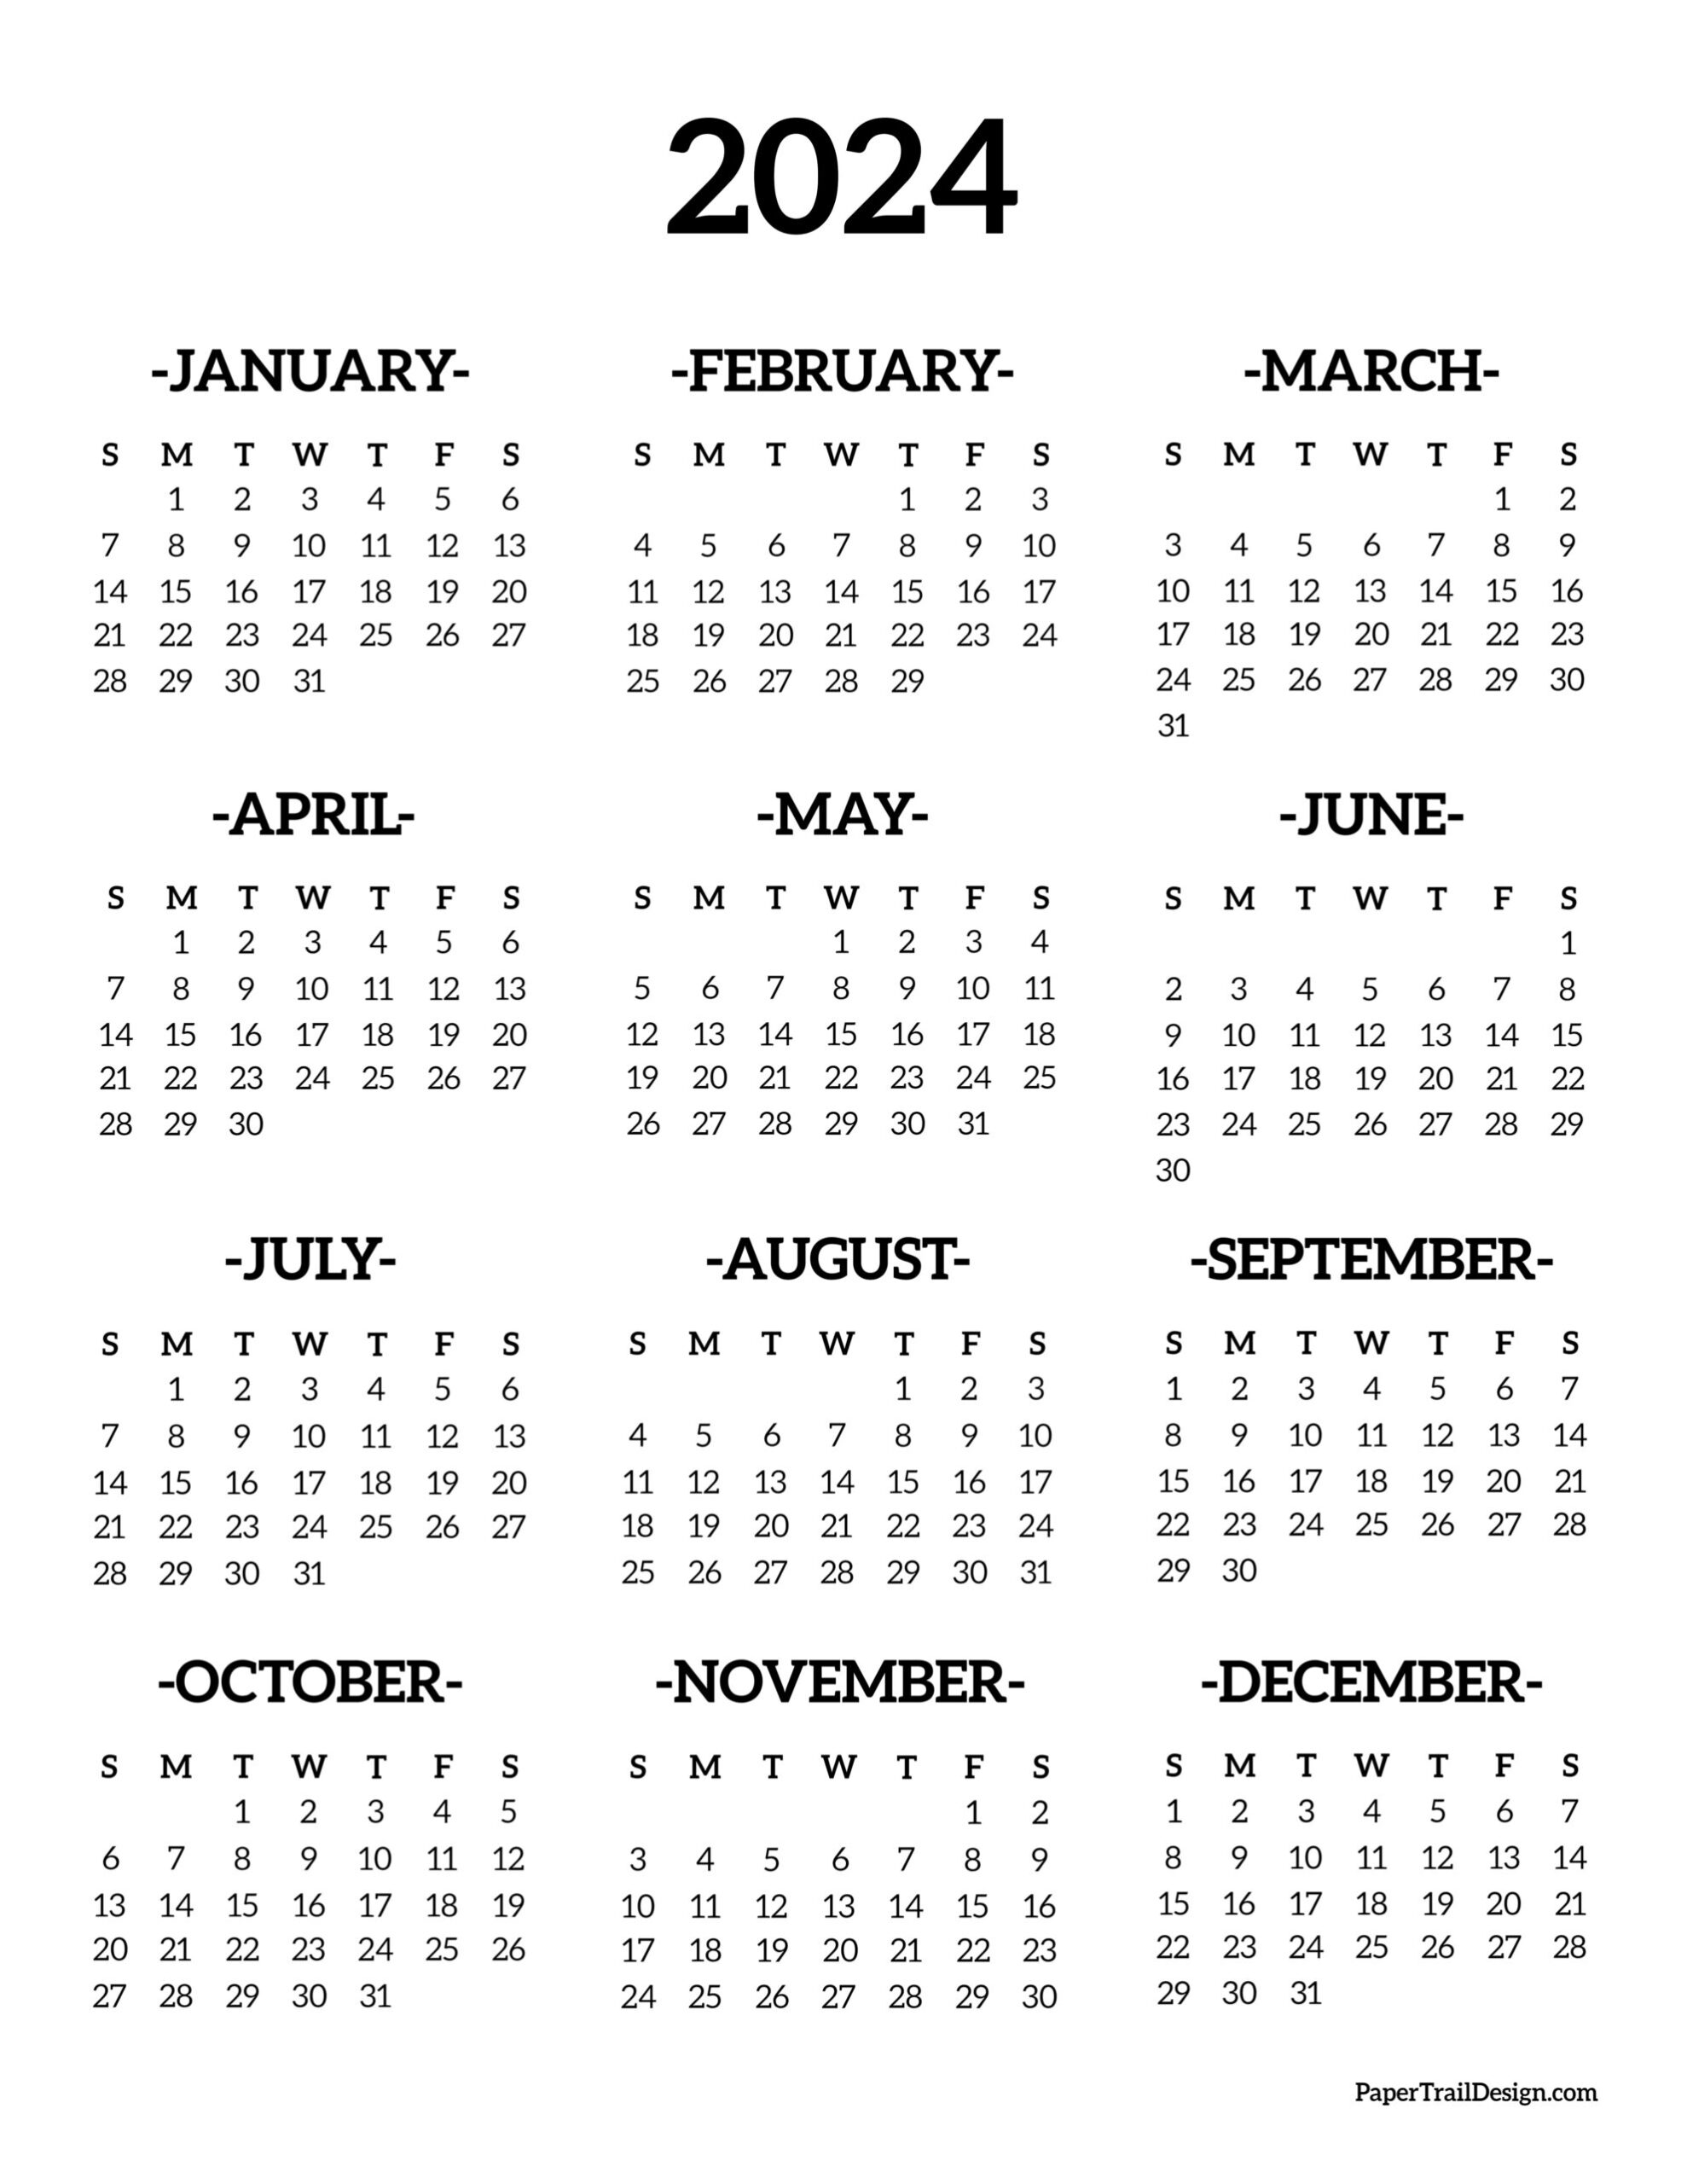 Calendar 2024 Printable One Page - Paper Trail Design for Printable Yearly Calendar 2024 And 2024